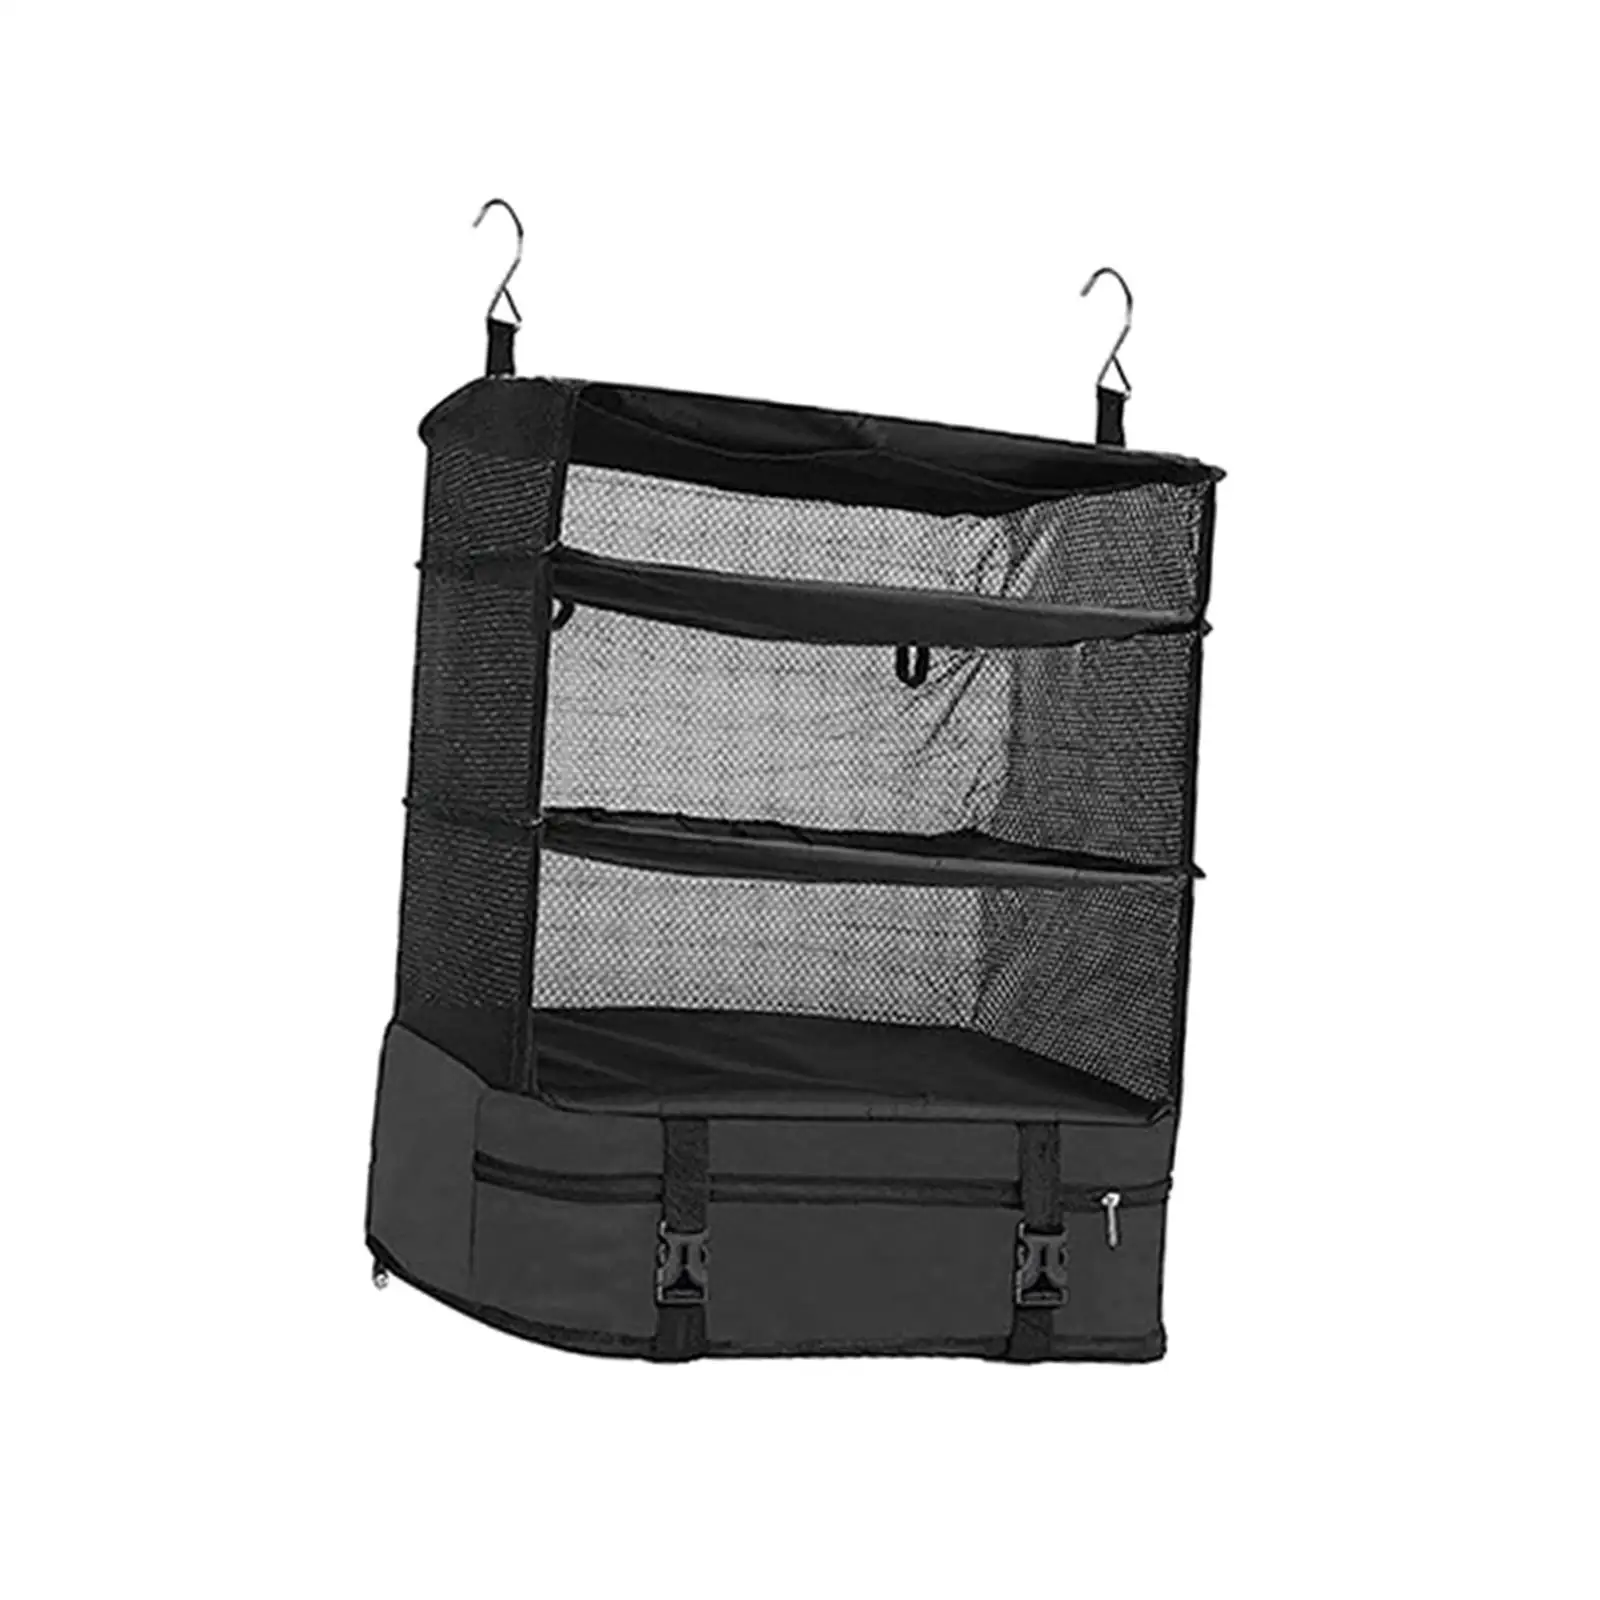 

Hanging Travel Shelves 3 Tier Compartment for Suitcases Packing Luggage Organizer Carry on Luggage for Travel Essentials